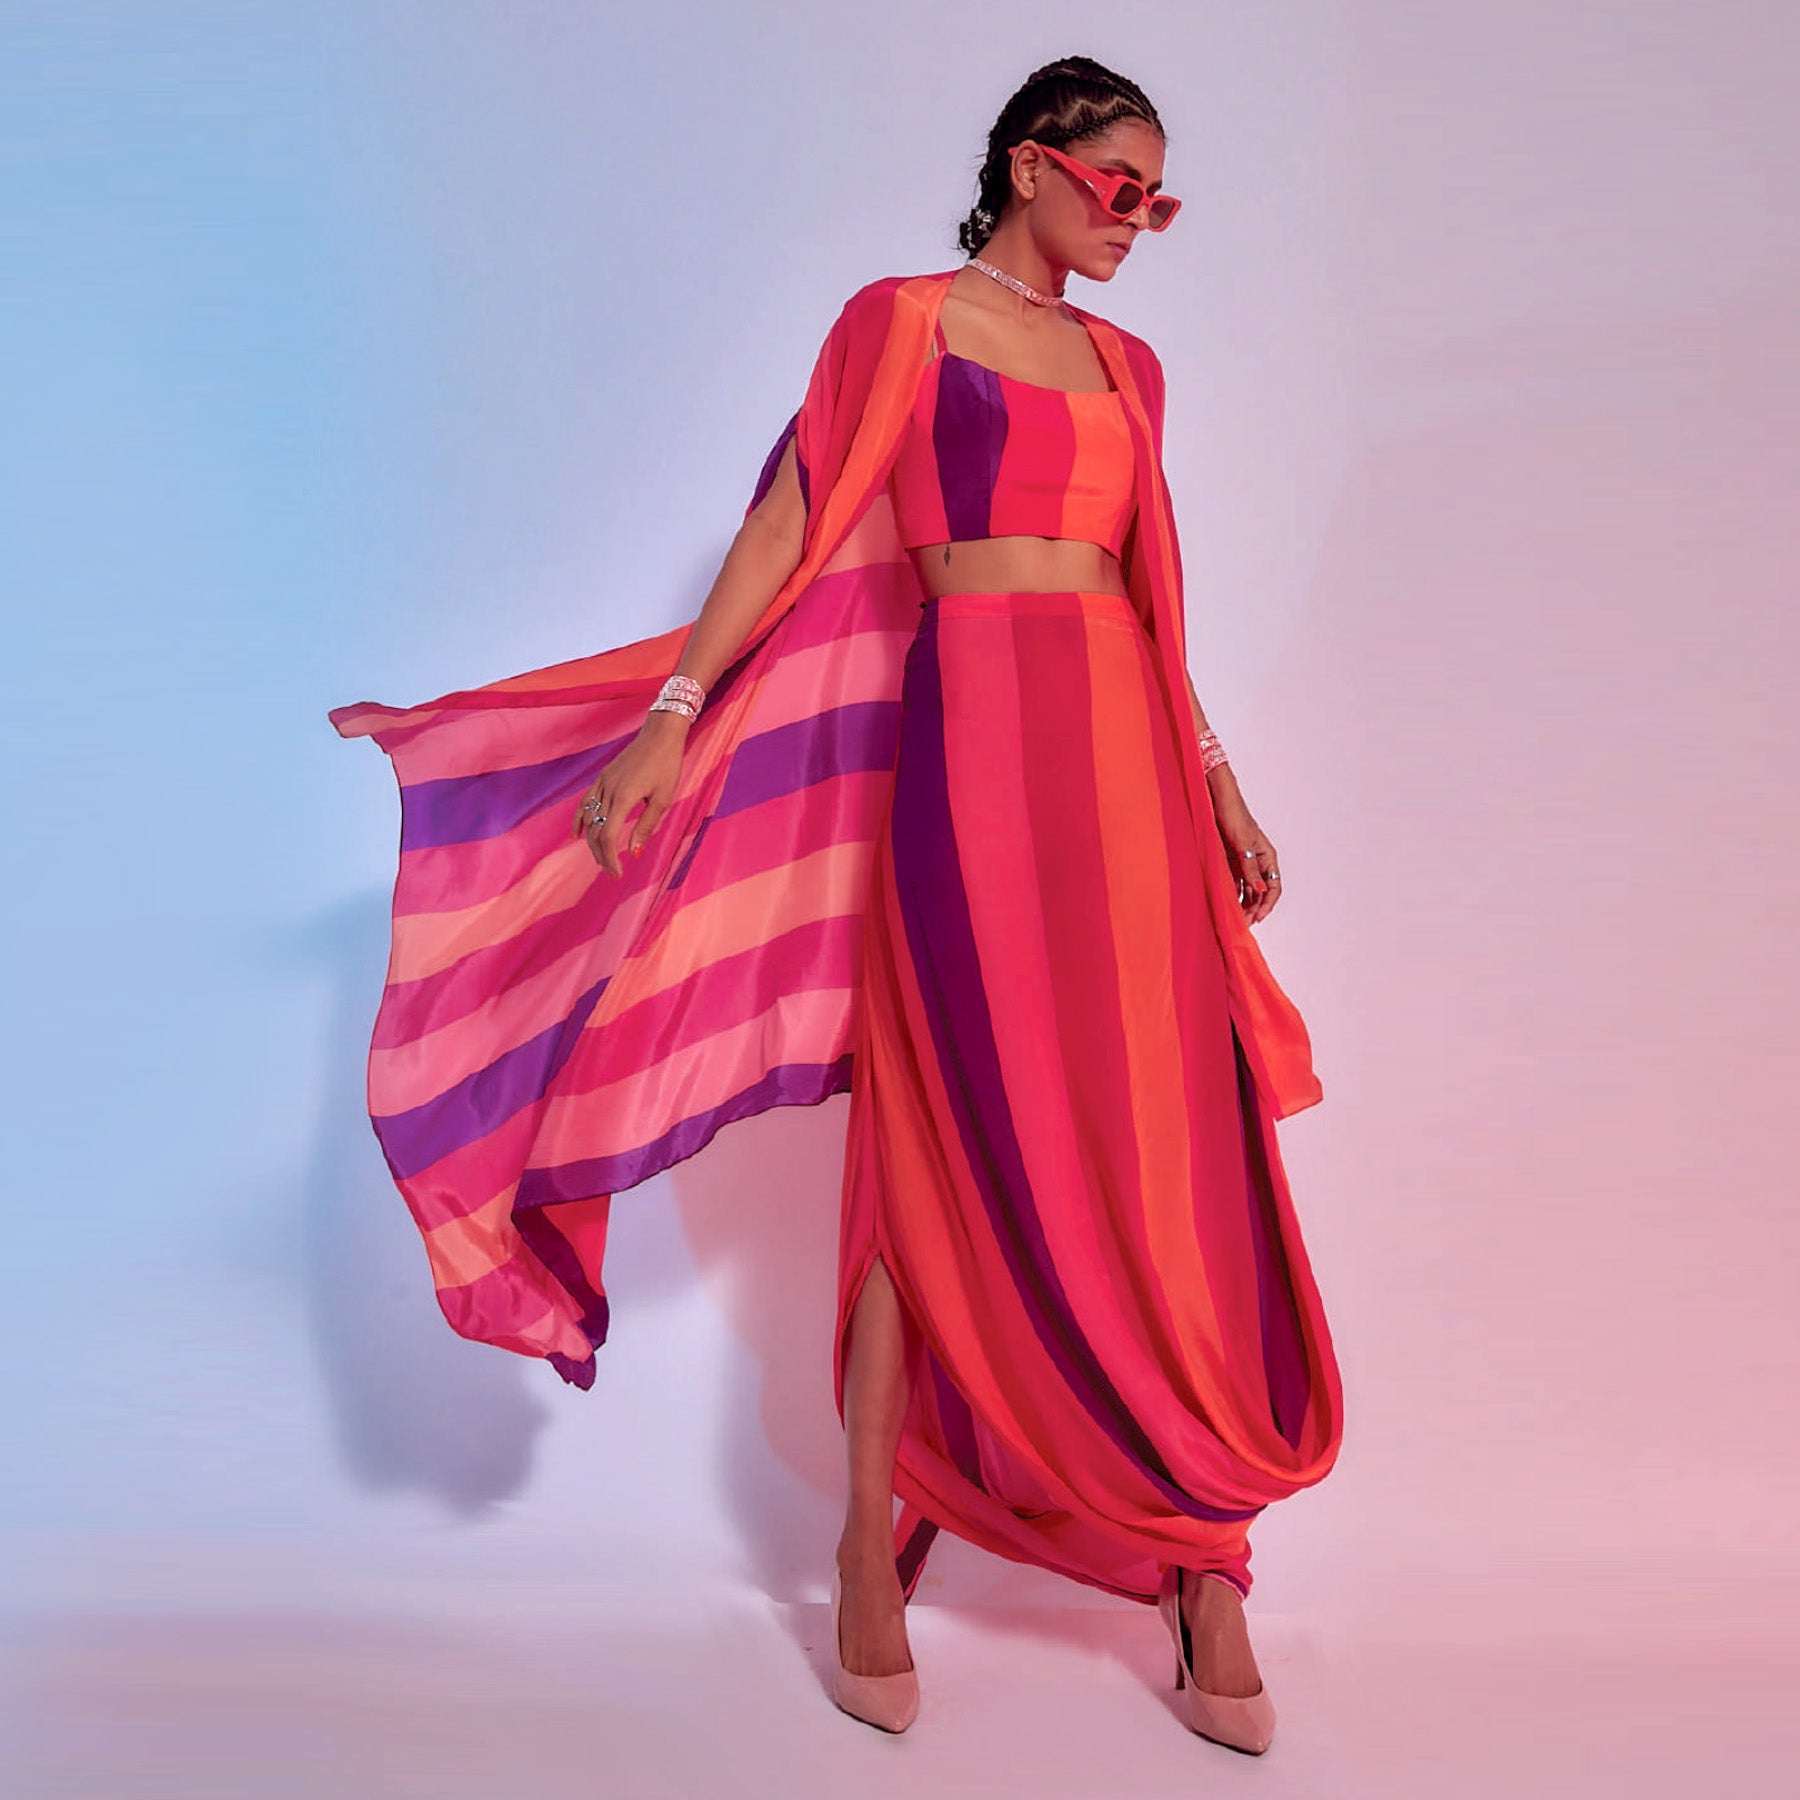 SUNSET STRIPES PRINTED DRAPE SKIRT, BUSTIER AND CAPE SET